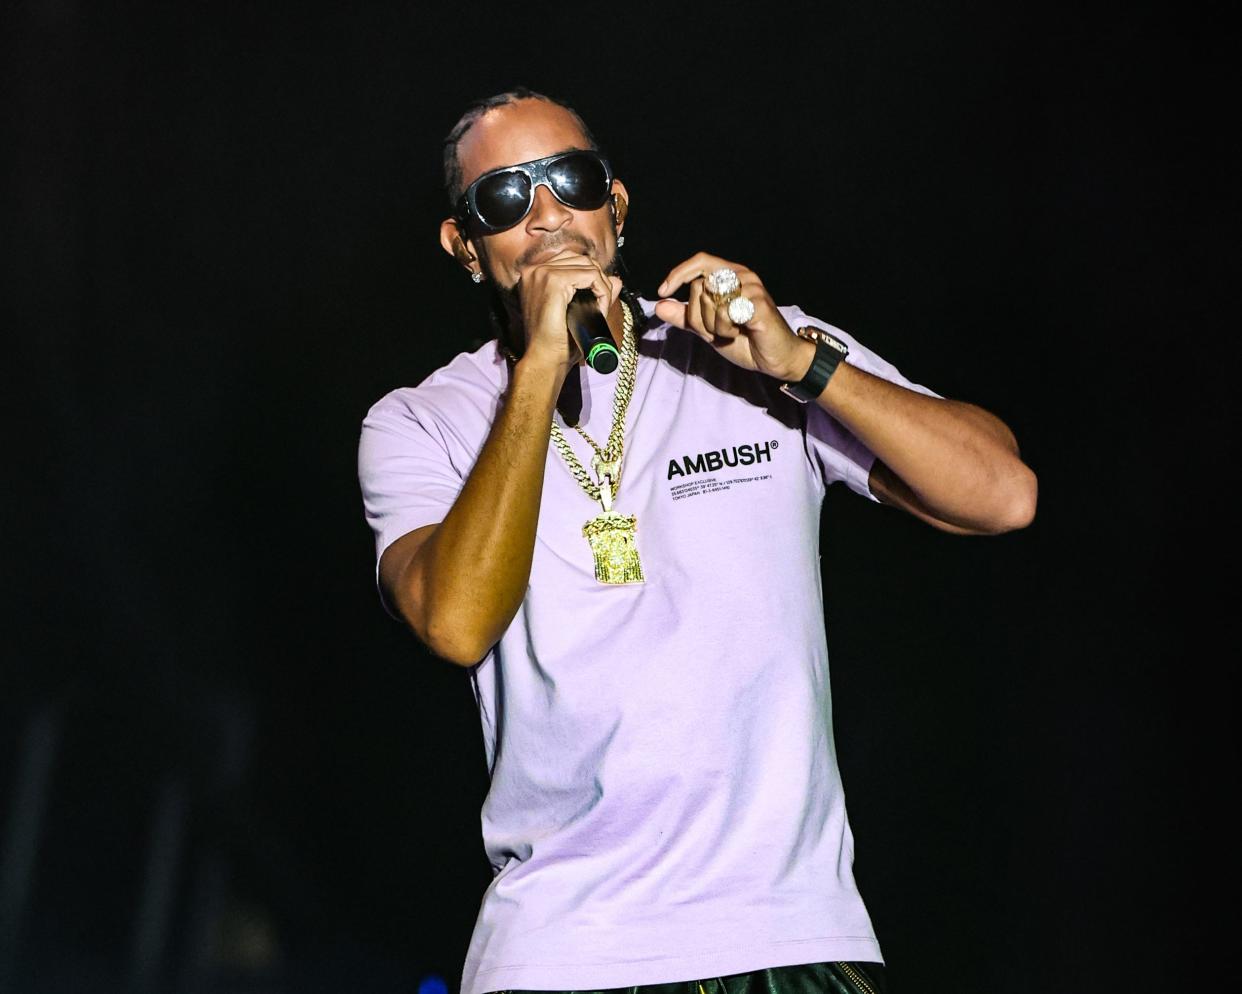 Rapper Ludacris shows love for Des Moinesnative producer at the Iowa